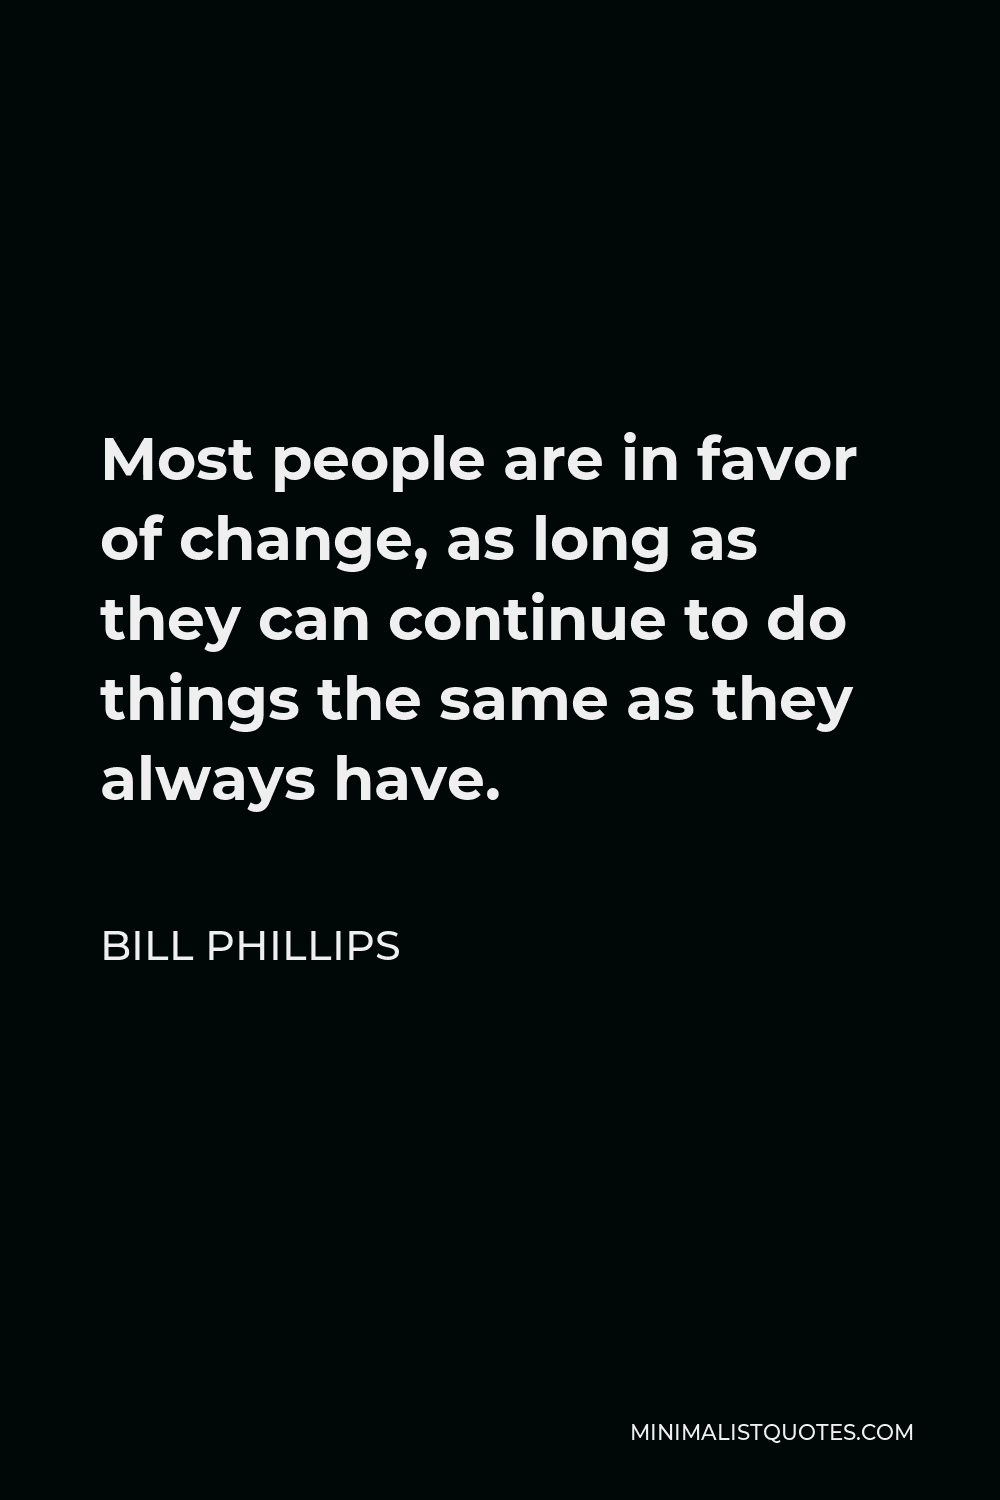 Bill Phillips Quote - Most people are in favor of change, as long as they can continue to do things the same as they always have.